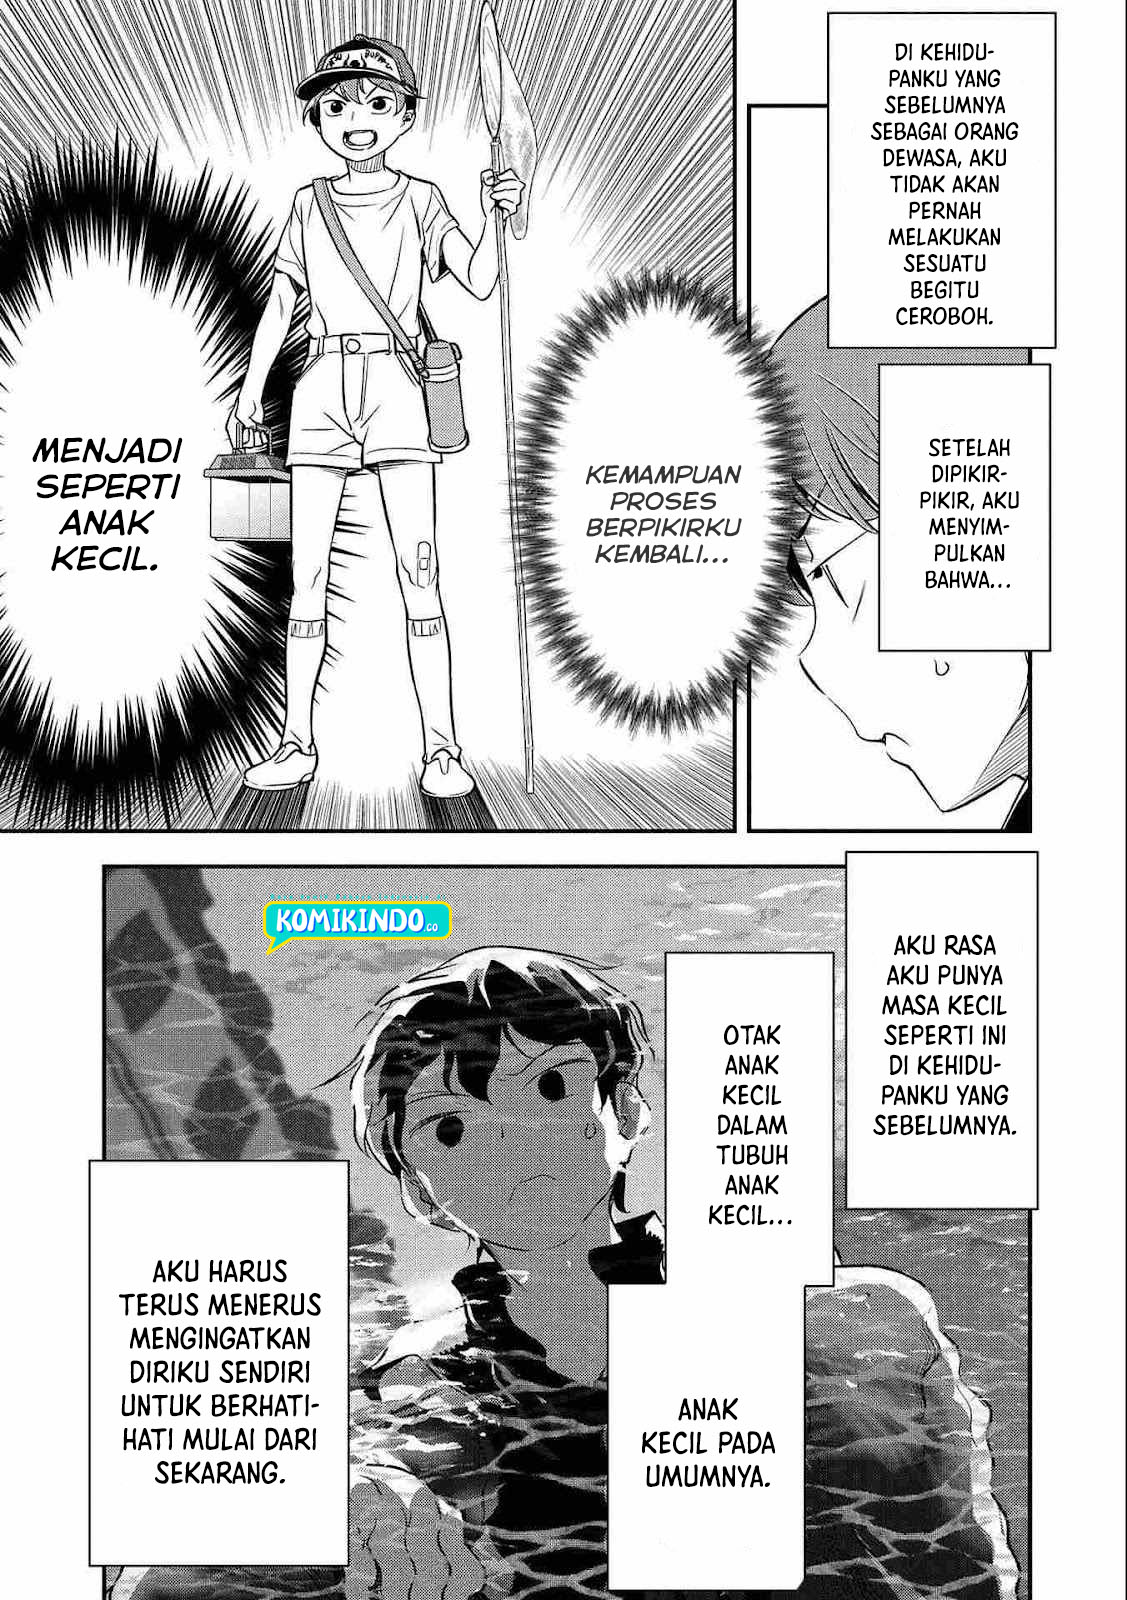 Villager A Wants to Save the Villainess no Matter What! Chapter 07